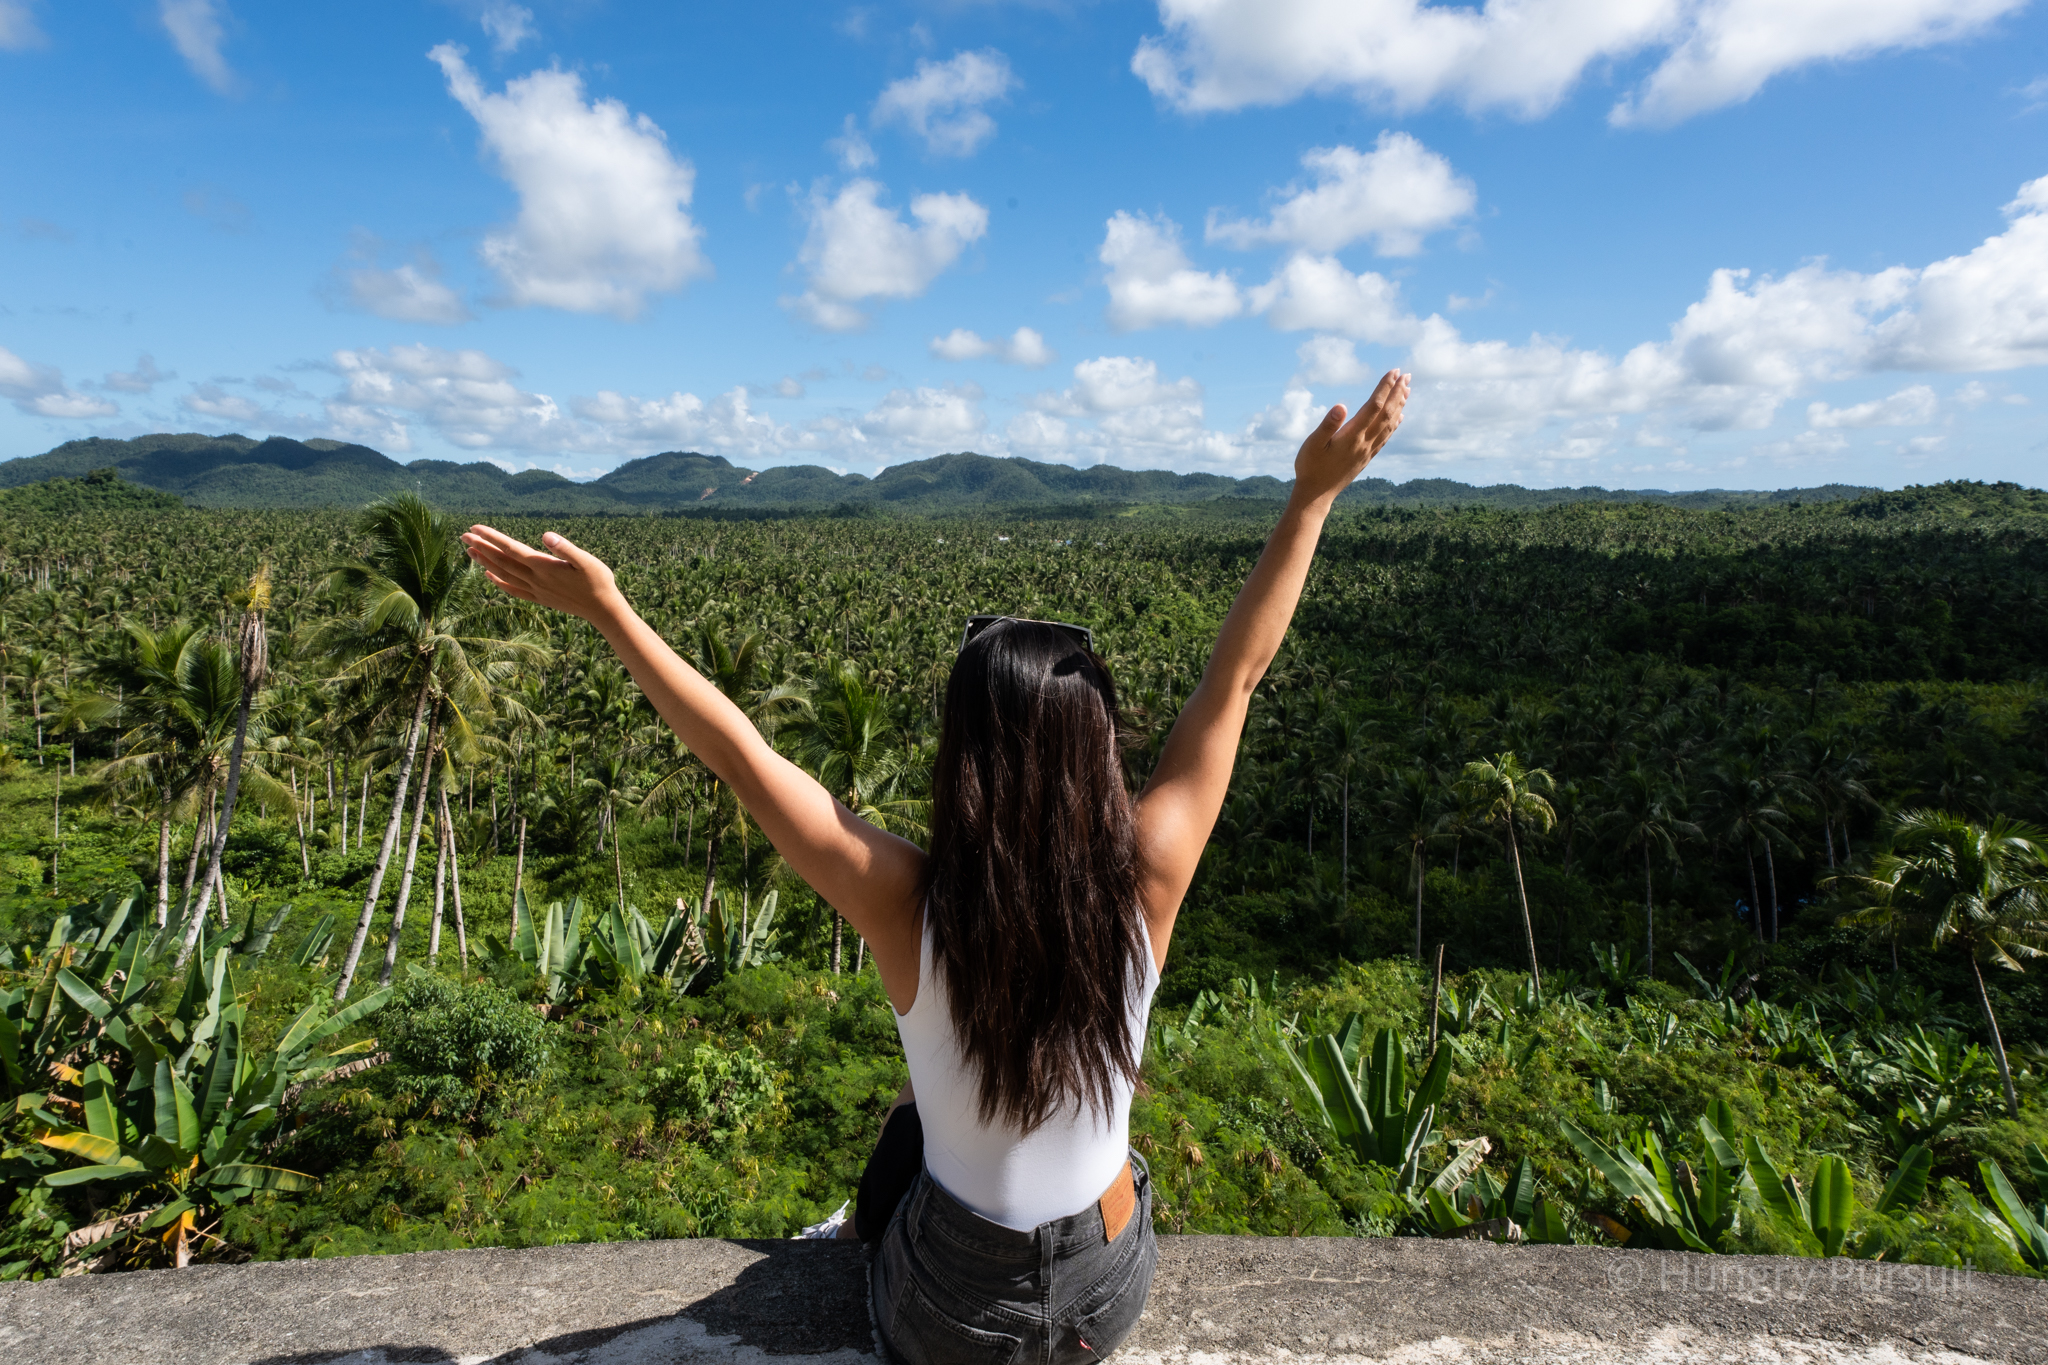 Girl sitting on the Coconut Road ledge in Siargao, hands raised in the air, embracing the island's beauty.